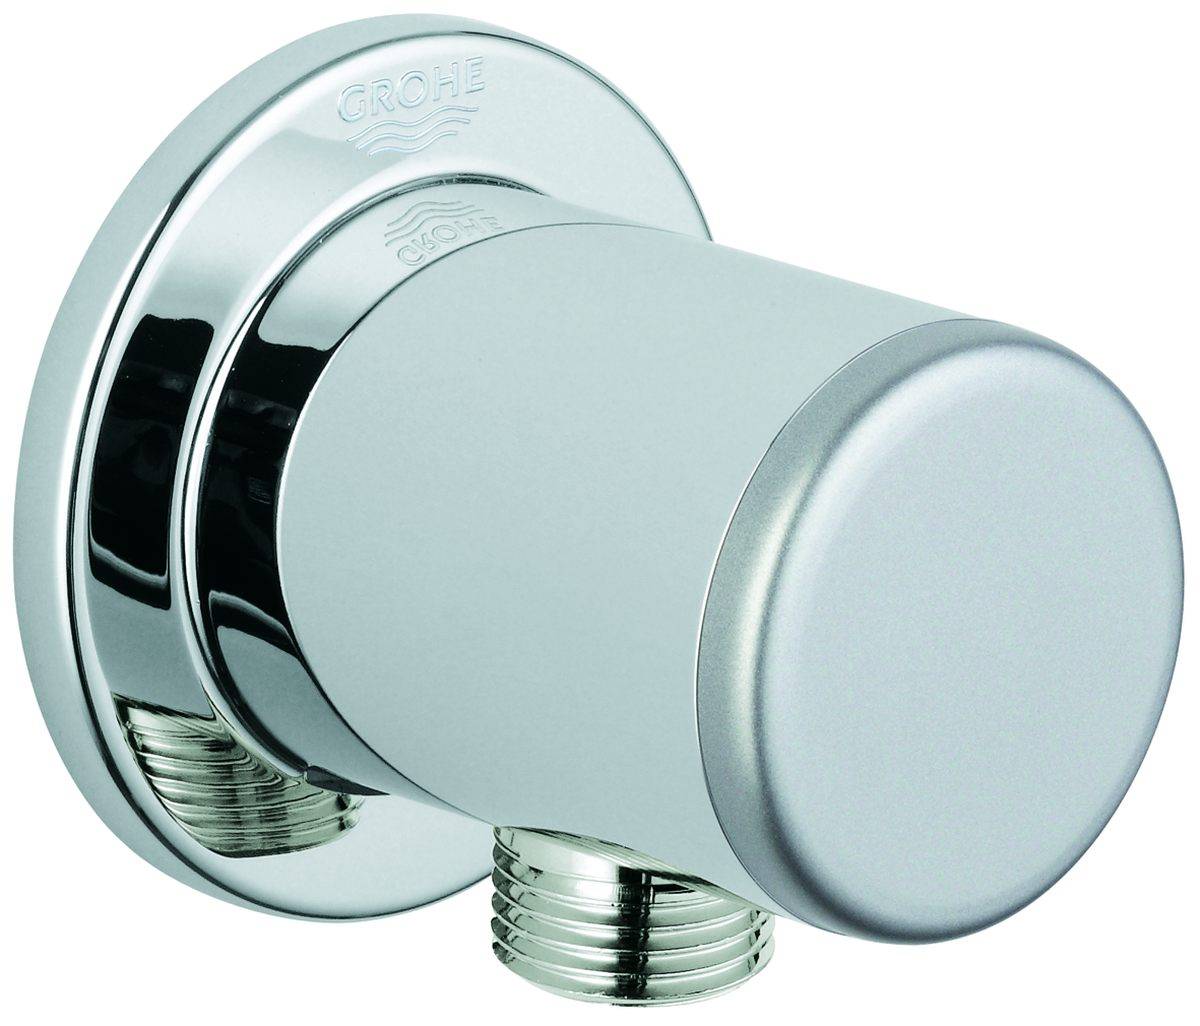 Relaxa Shower Outlet Elbow 1/2" - Wall Union